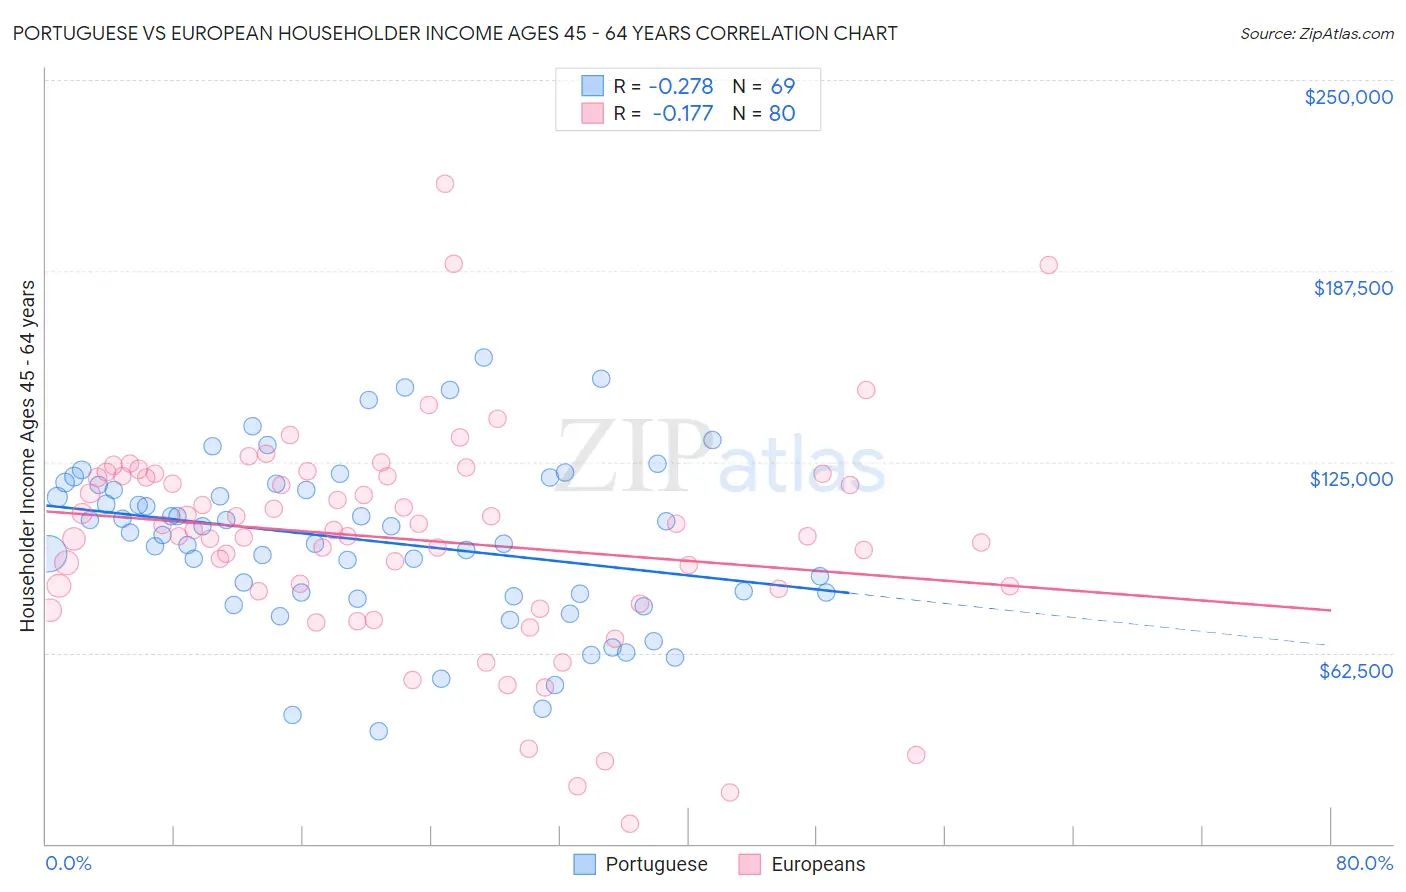 Portuguese vs European Householder Income Ages 45 - 64 years